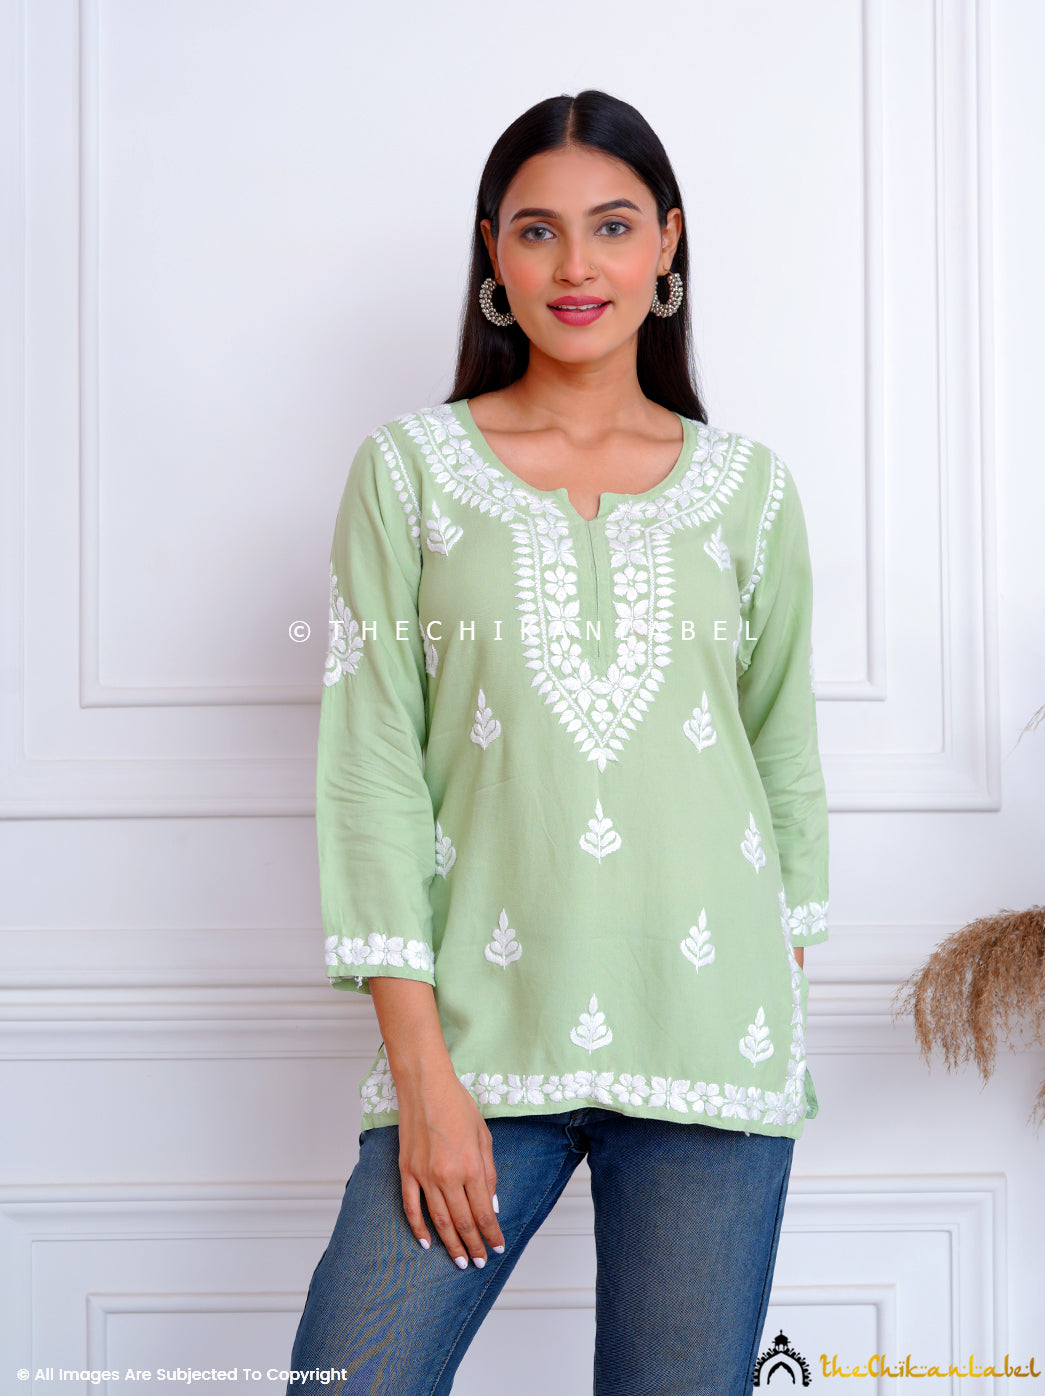 Buy chikankari tunic top online at best prices, Shop authentic Lucknow chikankari handmade tunic top in modal fabric for women 2